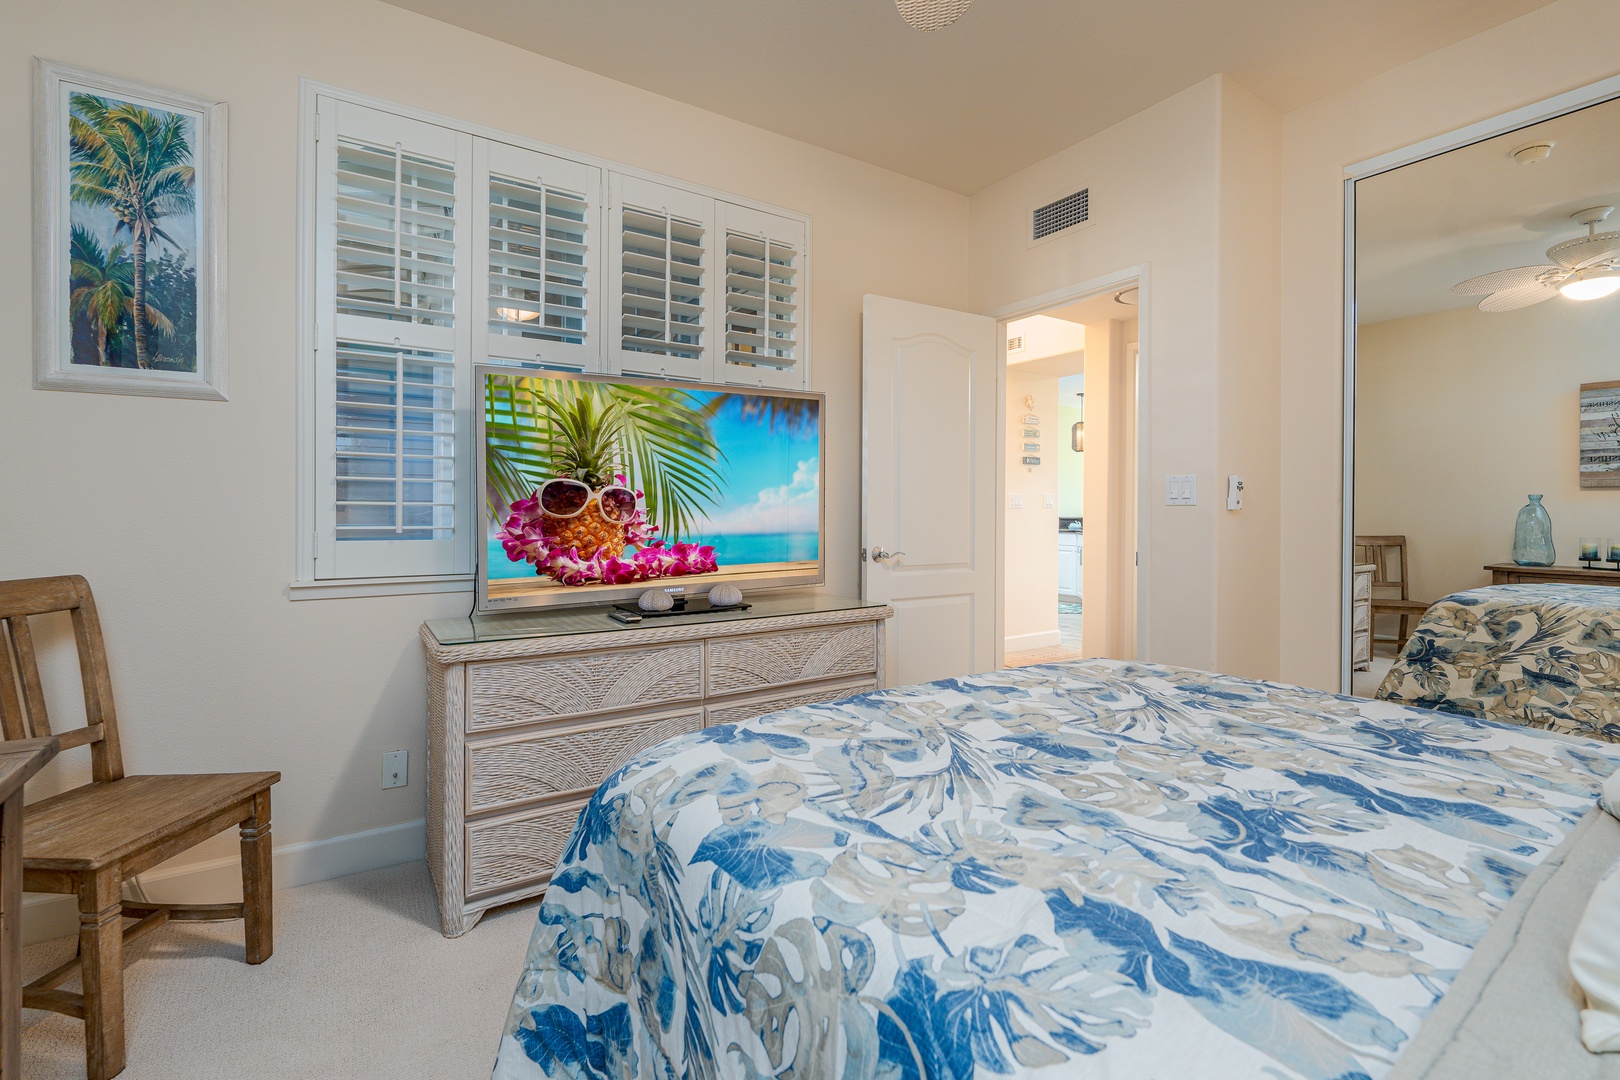 Kapolei Vacation Rentals, Ko Olina Kai 1097C - Guest bedroom with a queen bed and TV.